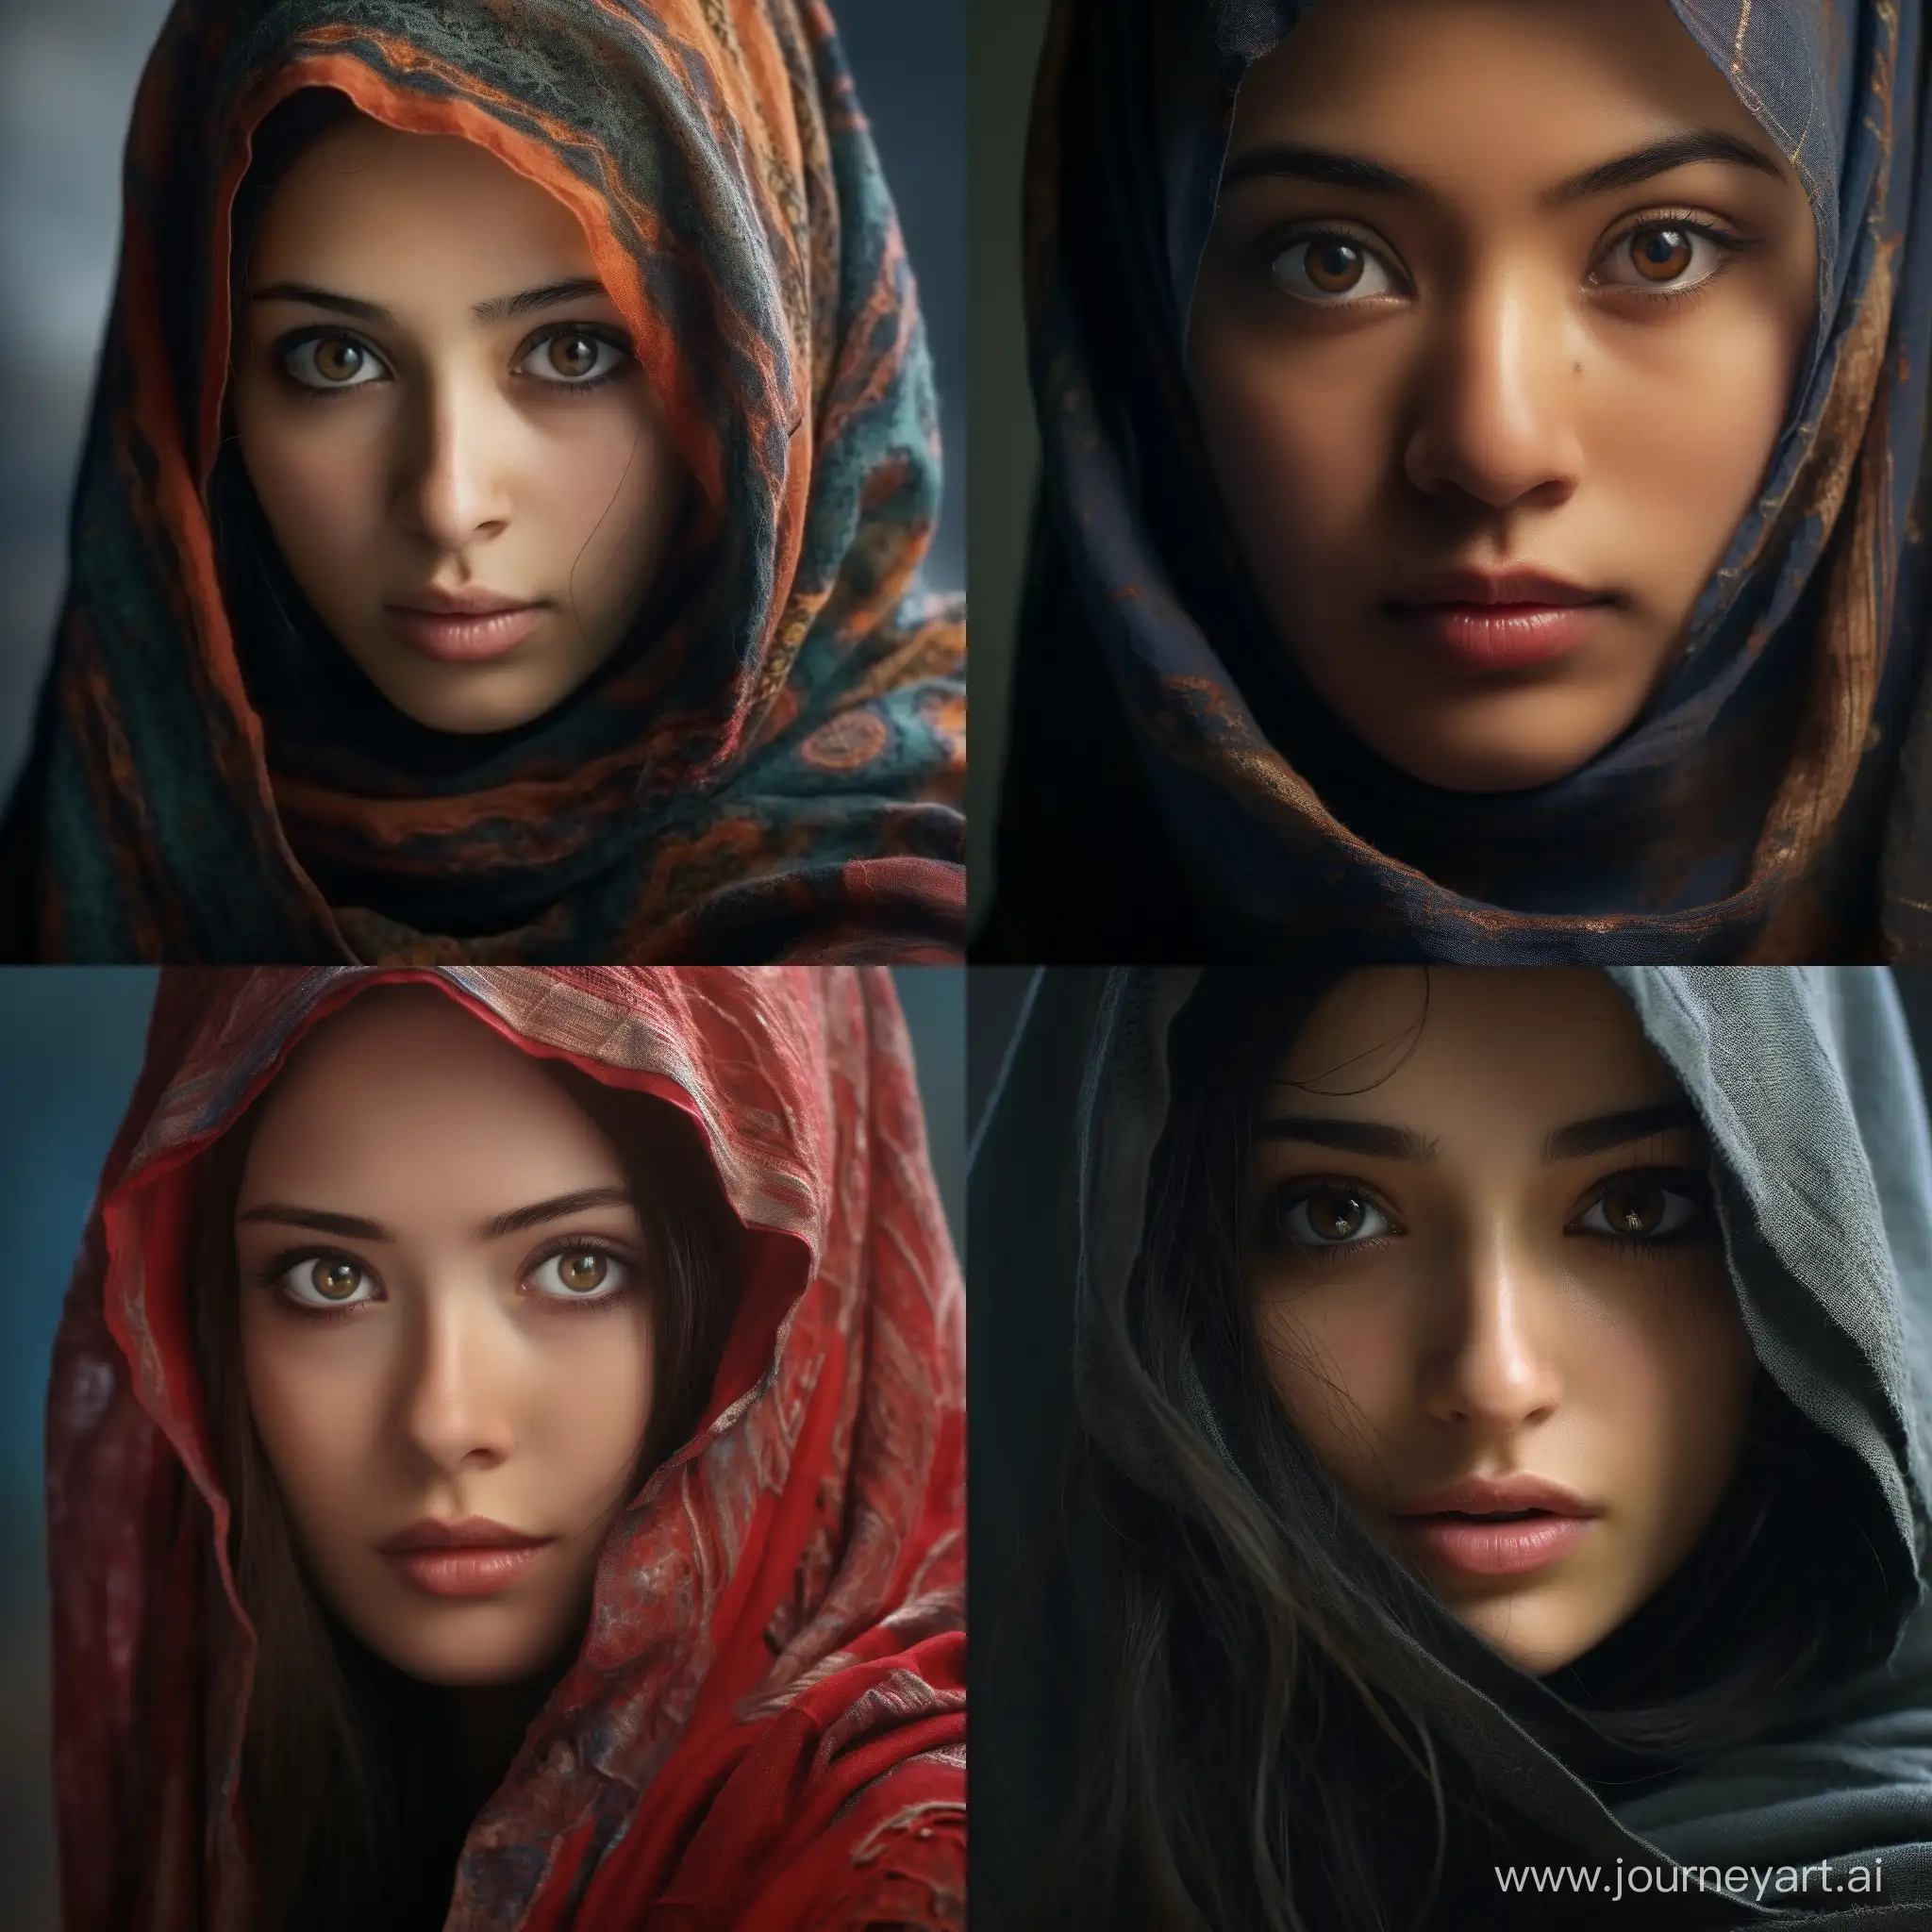 Captivating-Portrait-of-a-Malaysian-Girl-in-Traditional-Attire-with-Striking-Eyes